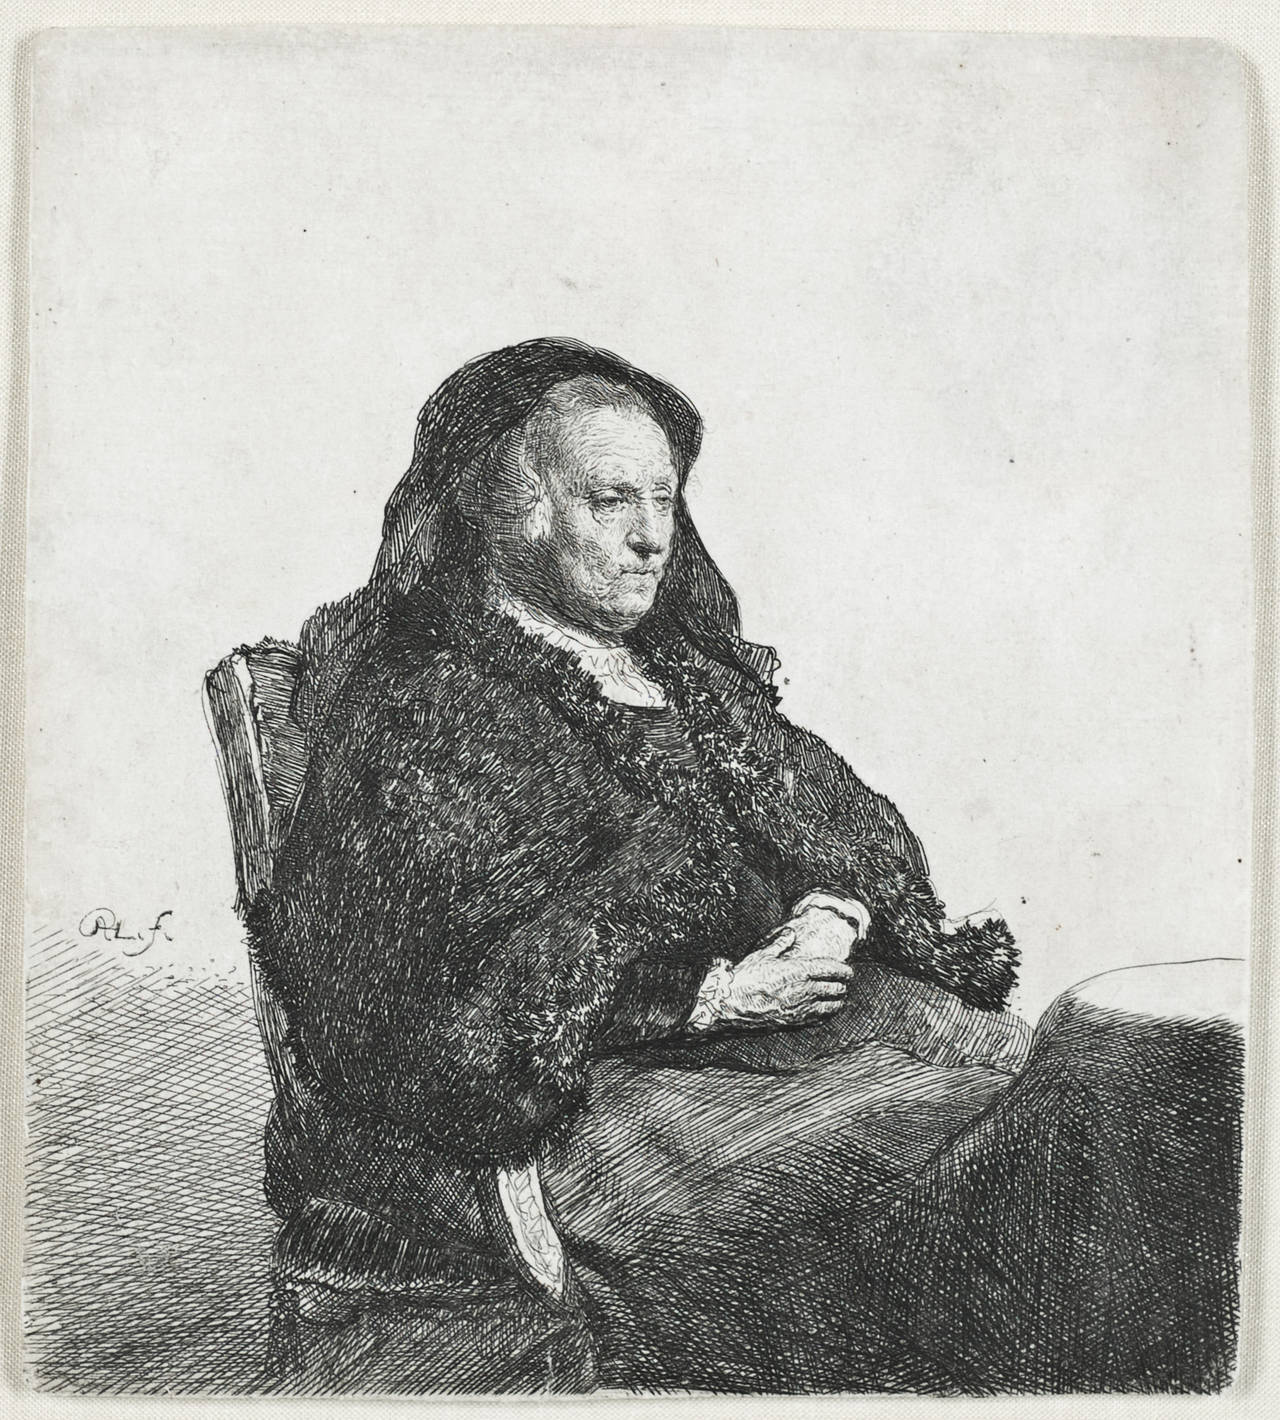 Rembrandt van Rijn Portrait Print - The Artist’s Mother seated at a table, looking right: Three quarter length